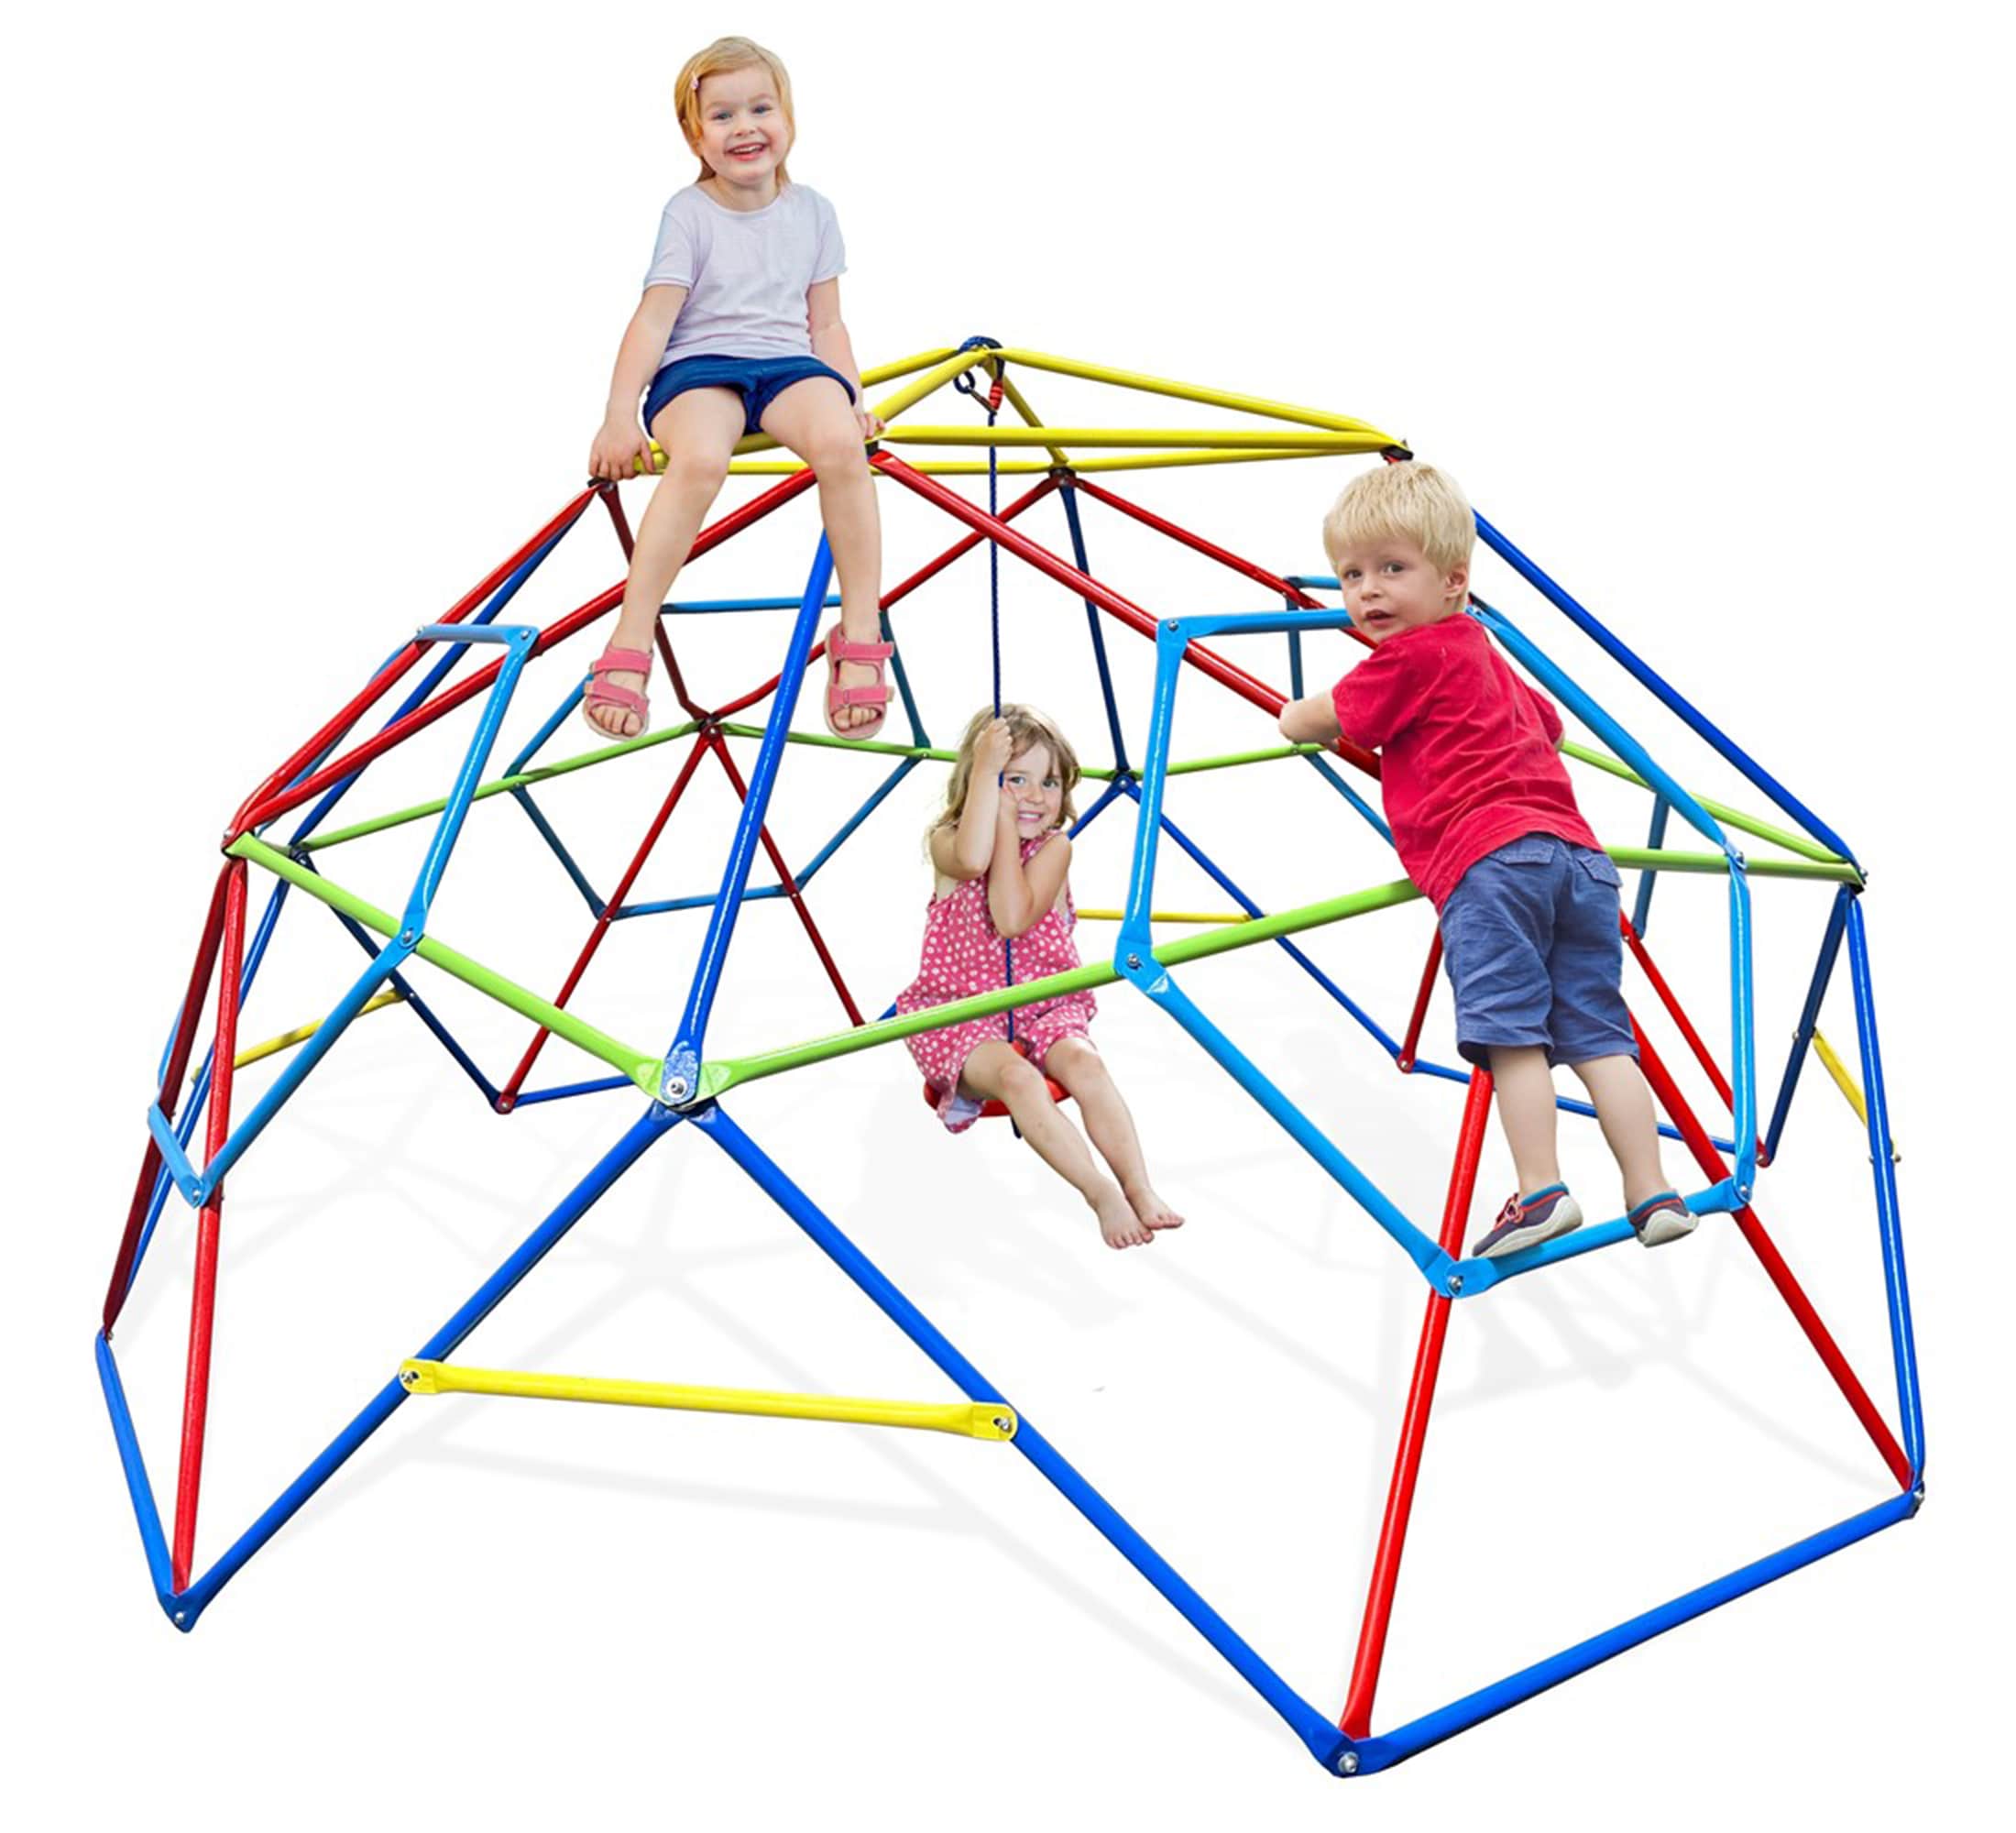 Geurig Injectie rijstwijn FITNESS REALITY KIDS FITNESS REALITY KIDS 10FT Climbing Dome, Outdoor  Geometric Dome Climber, Jungle Gym with Disc Swing in the Climbers  department at Lowes.com